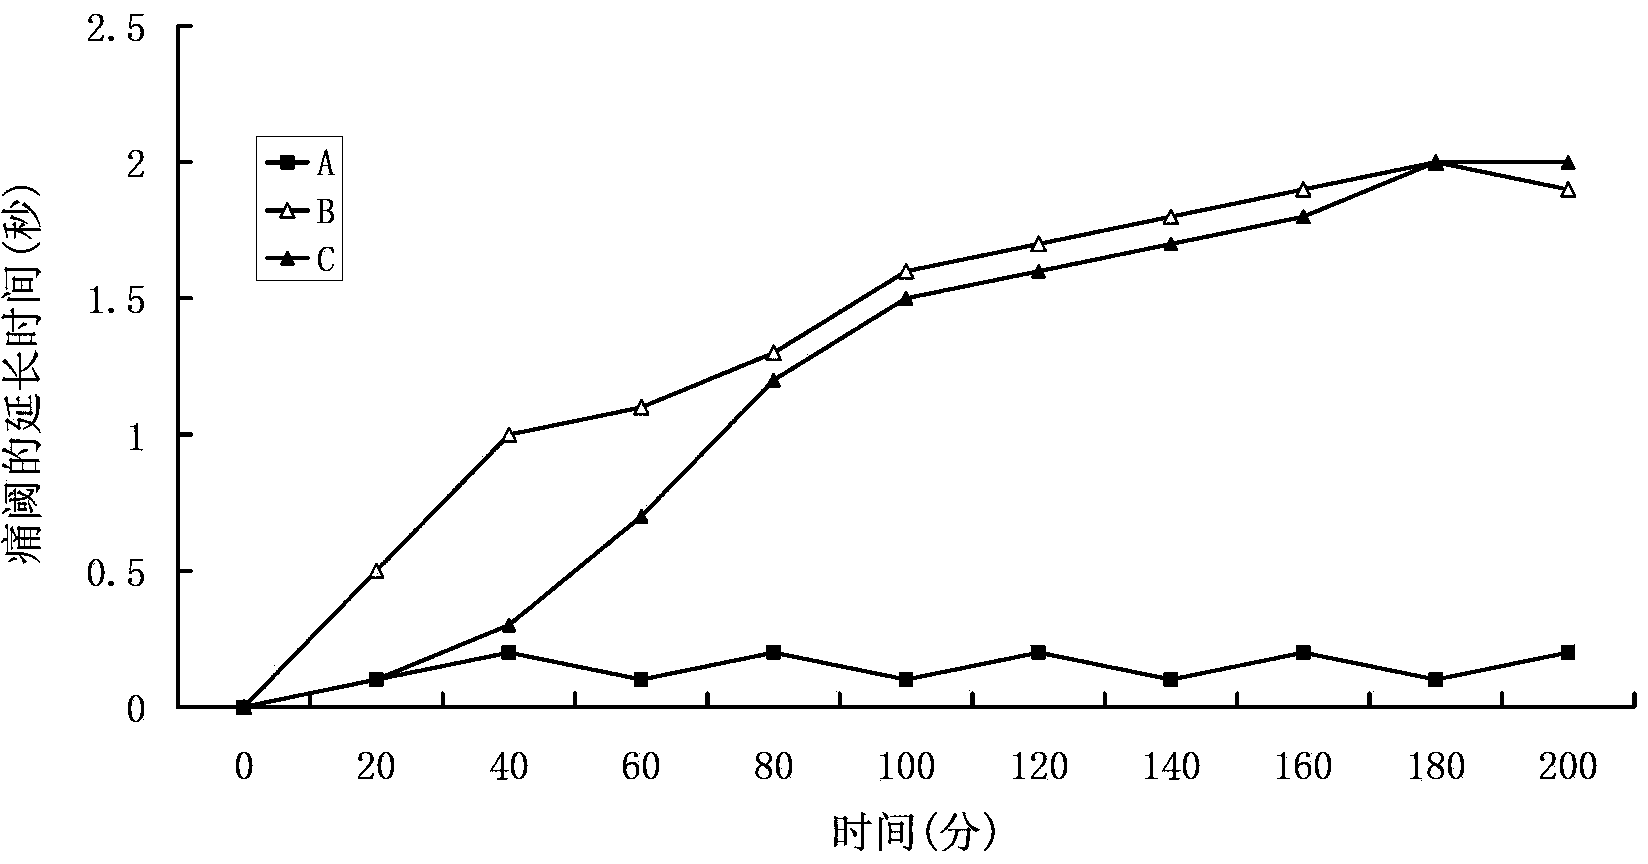 Positively charged water-soluble 4-acetamidophenol having rapid skin penetration speed, and related compound prodrug thereof